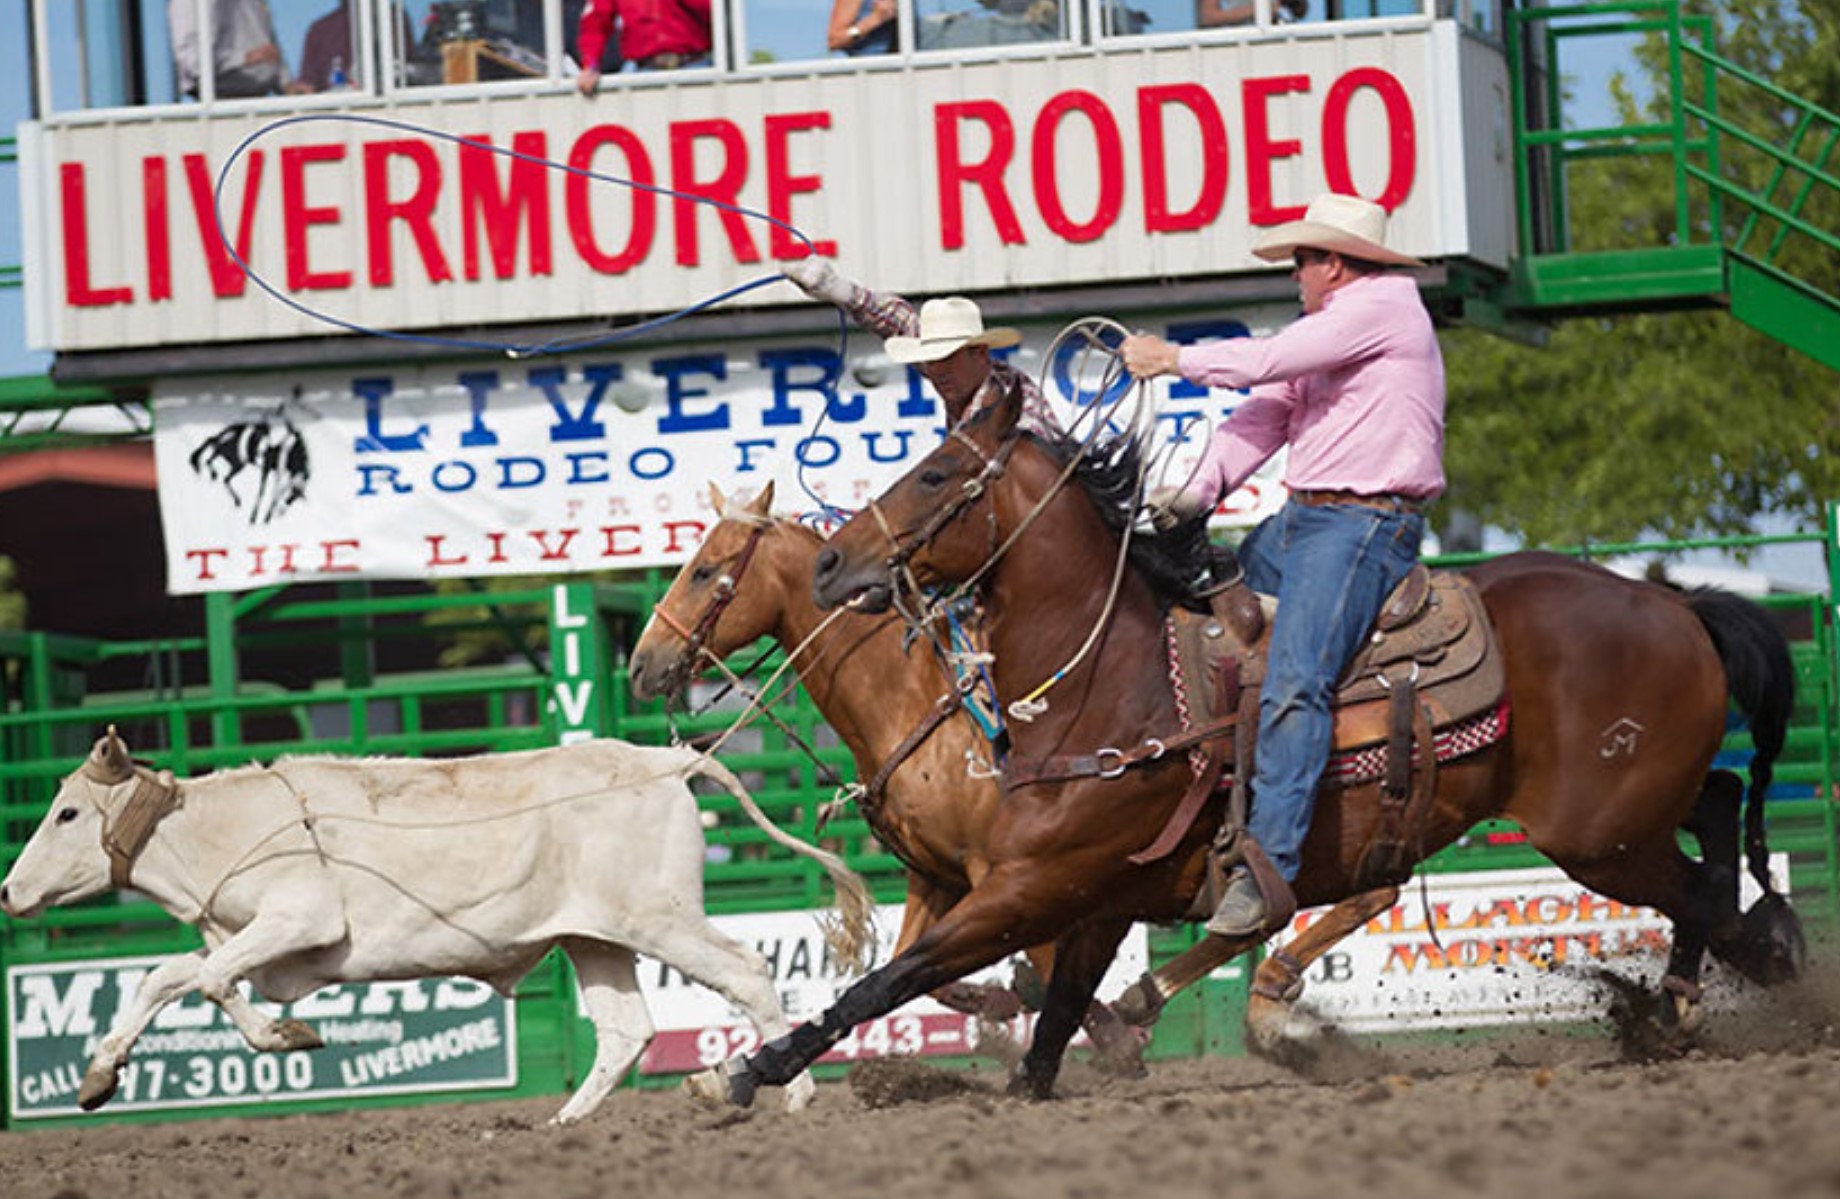 Back in the saddle again Livermore Rodeo returns this weekend